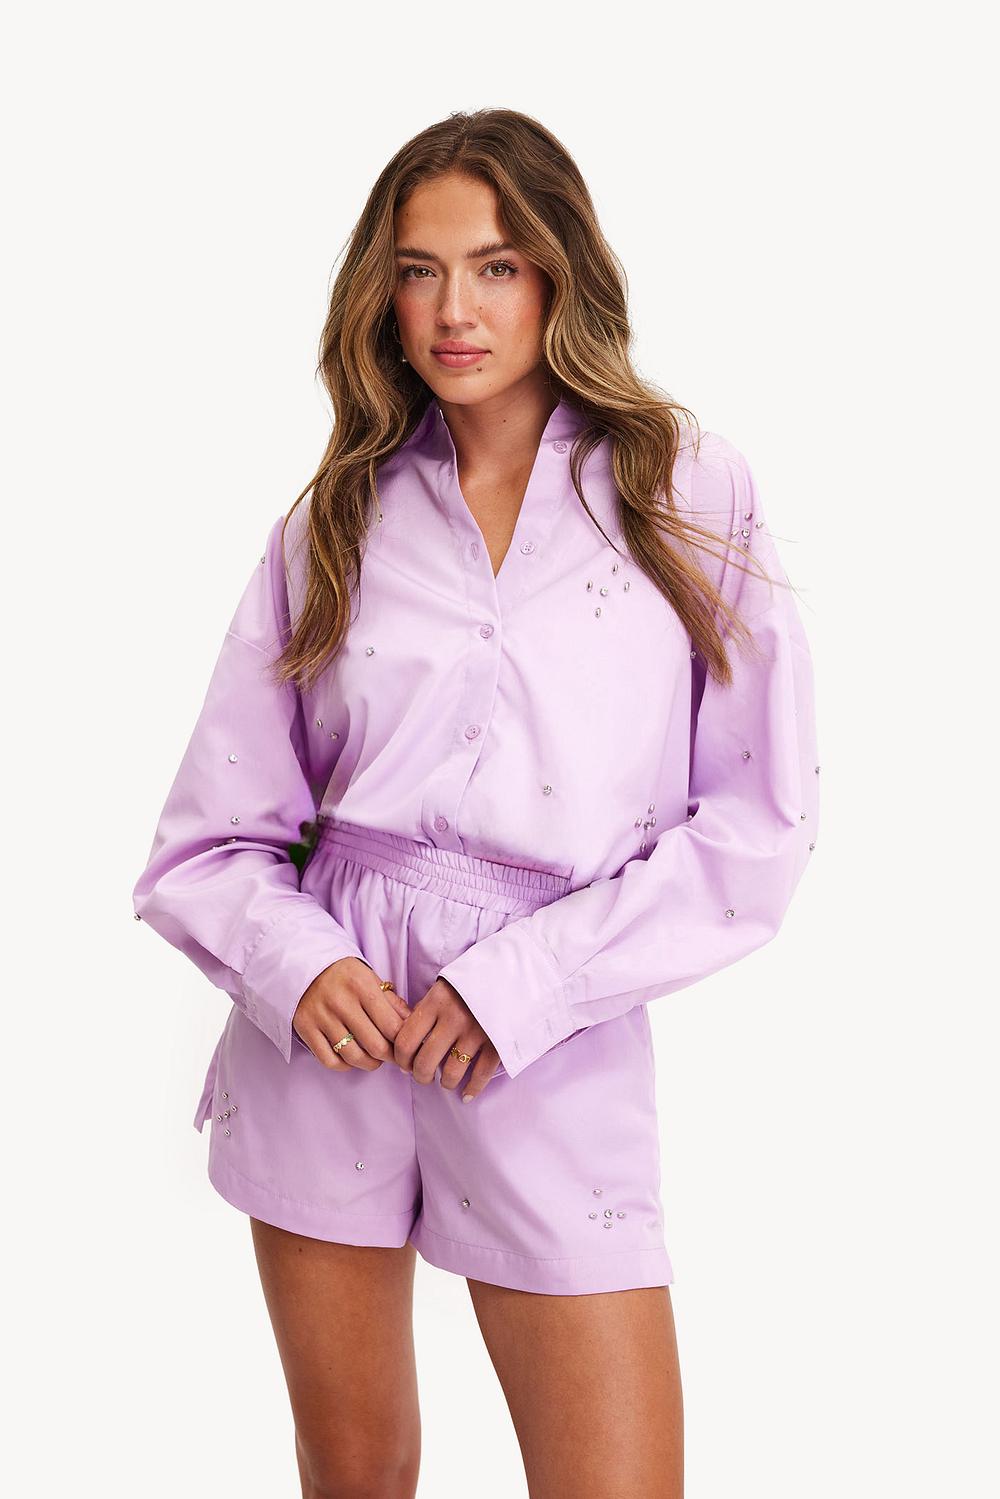 Lilac blouse with embellishments